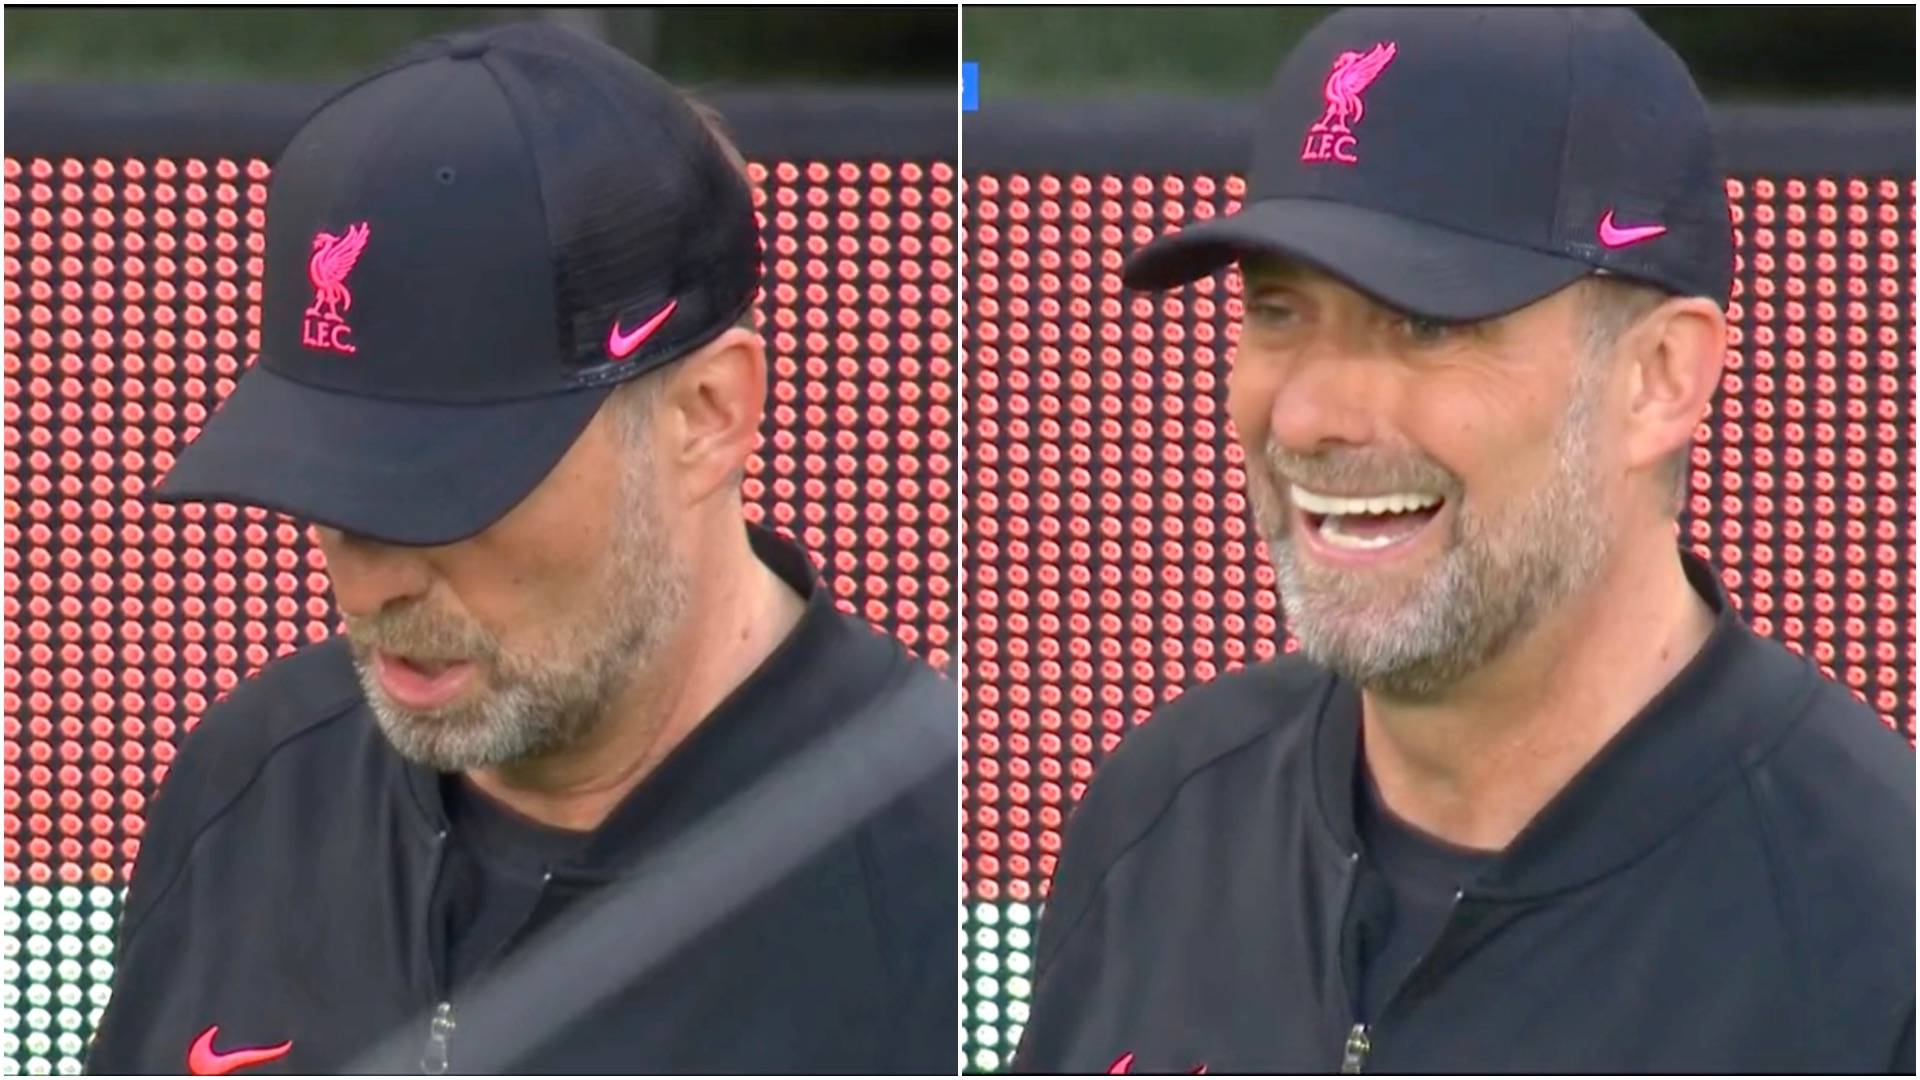 Jurgen Klopp has gone viral after funny moment just before FA Cup final penalty shoot-out